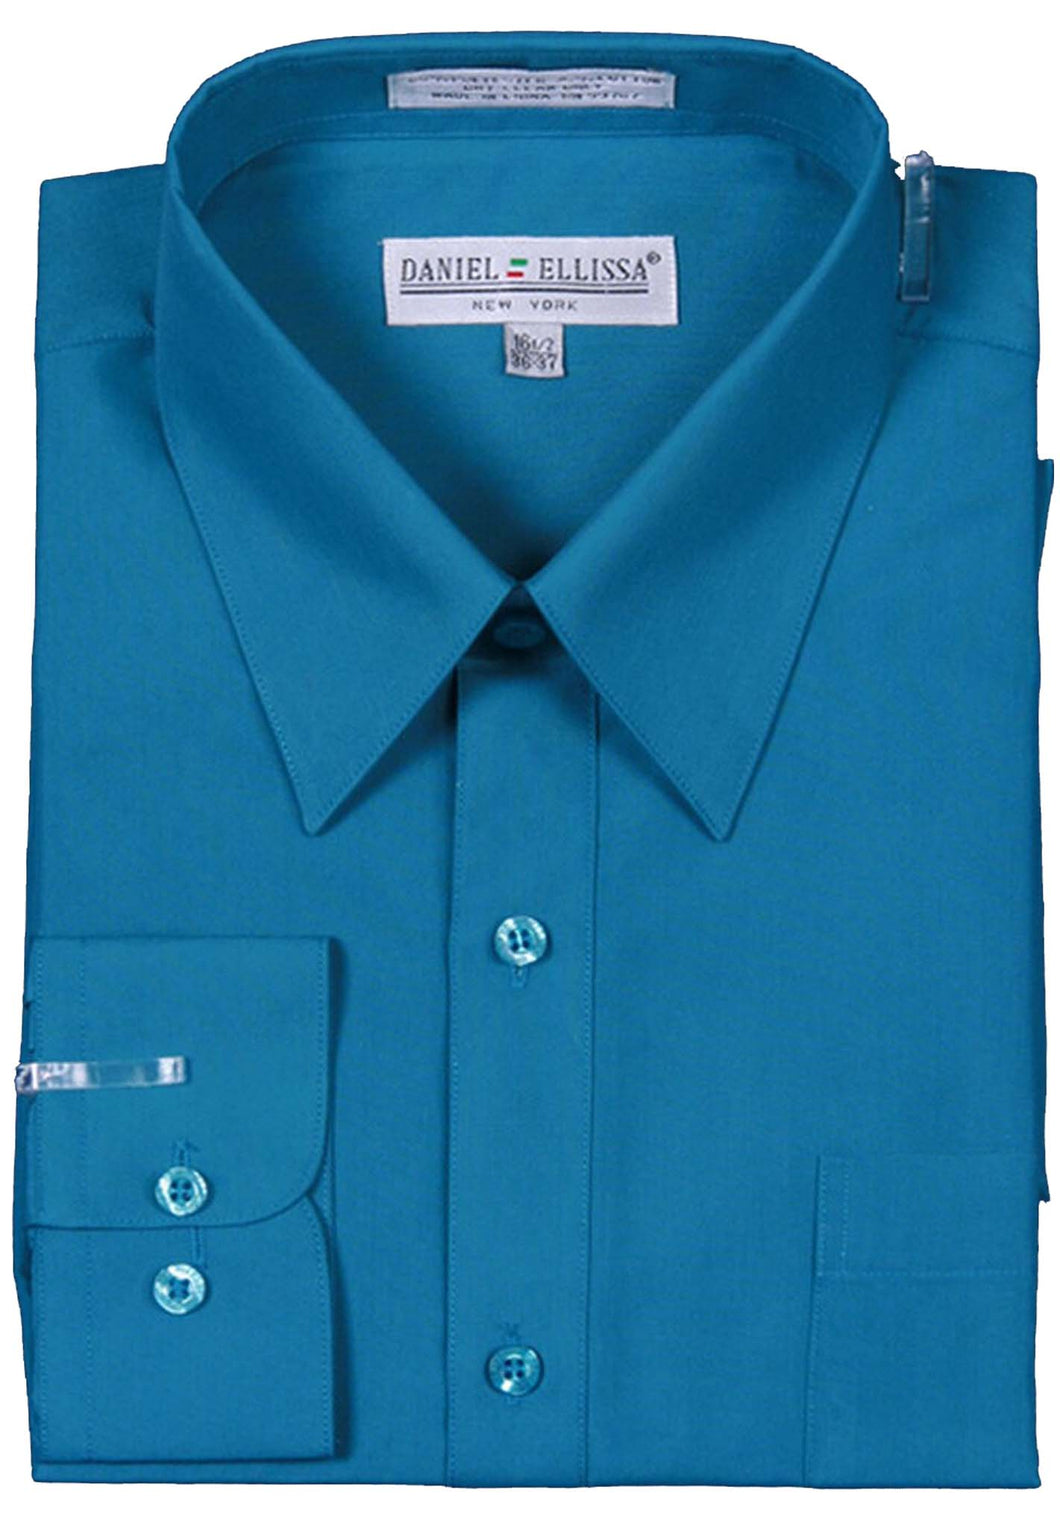 Men's Basic Dress Shirt  with Convertible Cuff -Color Teal